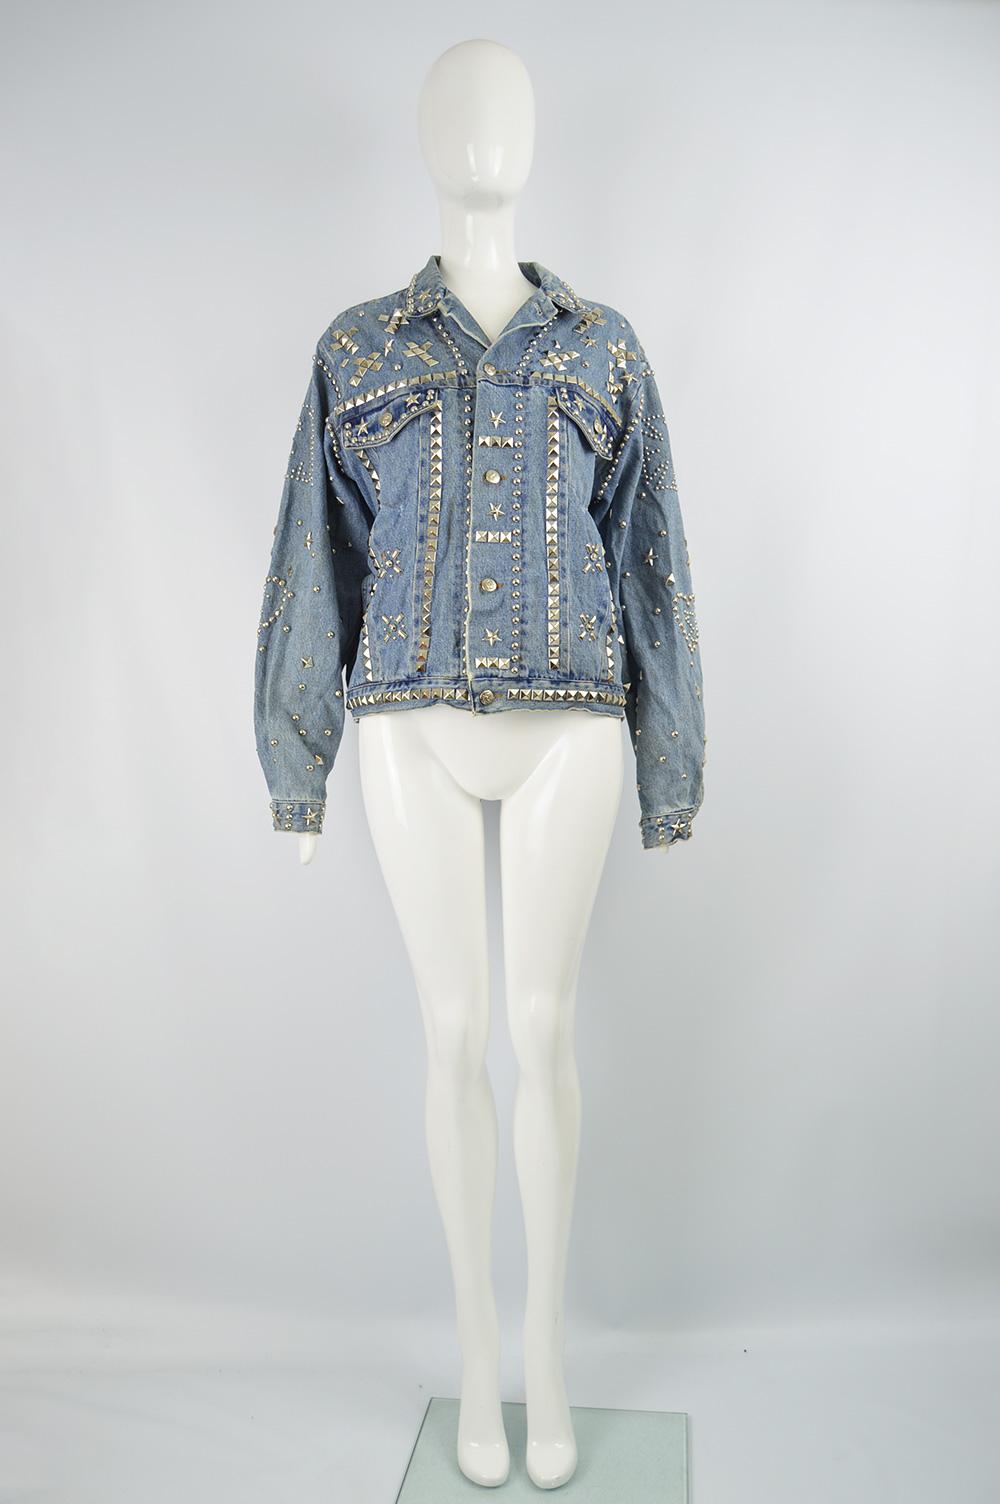 An incredibly rare vintage unisex Katharine Hamnett denim jacket from her 1989 'Clean Up Or Die' collection.  Pieces from this collection have been showcased in the V&A. In a blue denim with incredible studs creating a rock n roll look. 

Size: